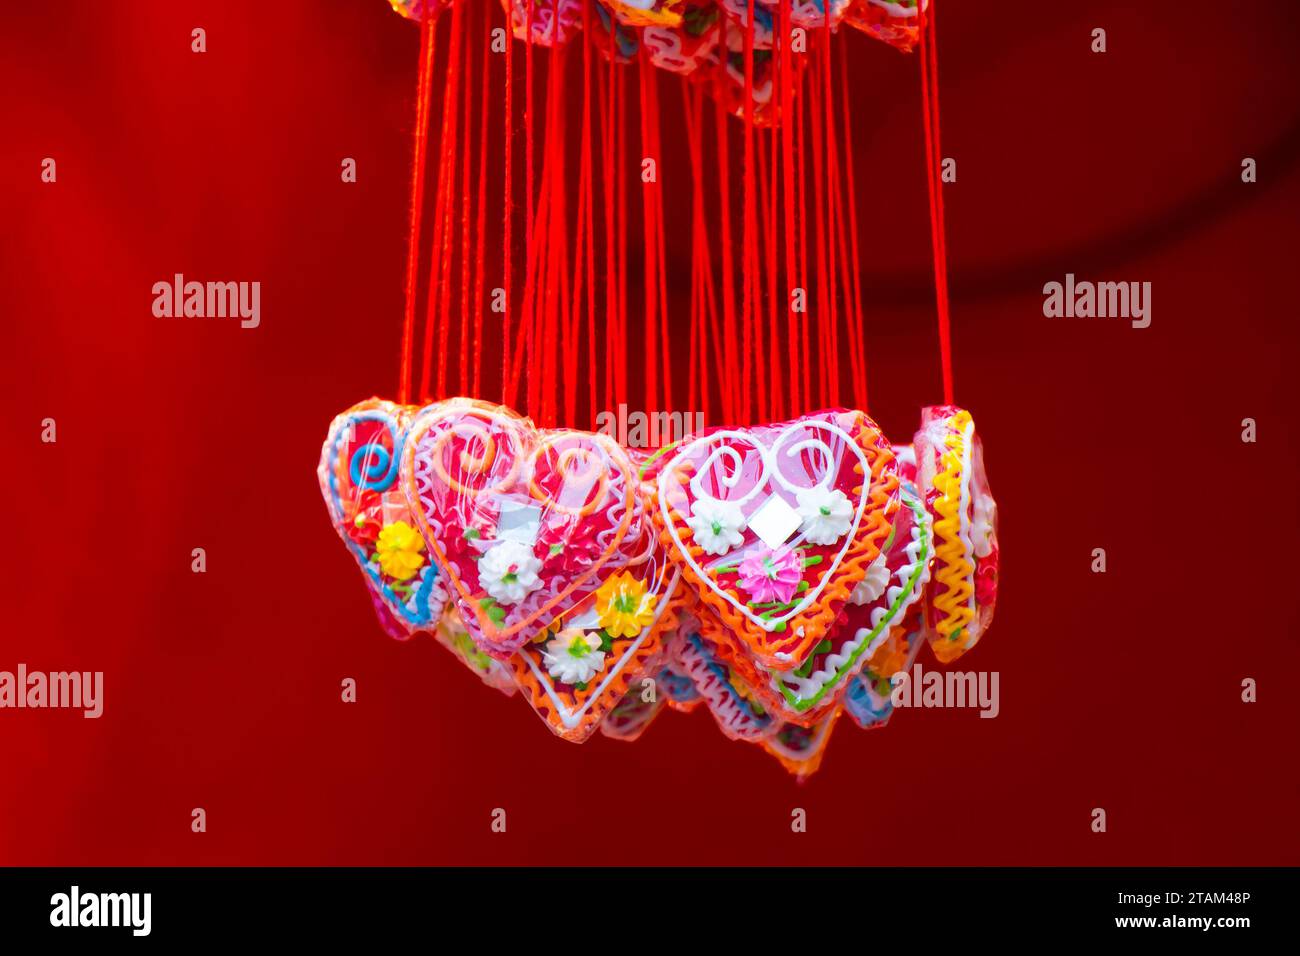 Red heart shaped lolly pops, sweetheart necklace on Christmas markets are traditional souvenir edible gifts, detail Stock Photo